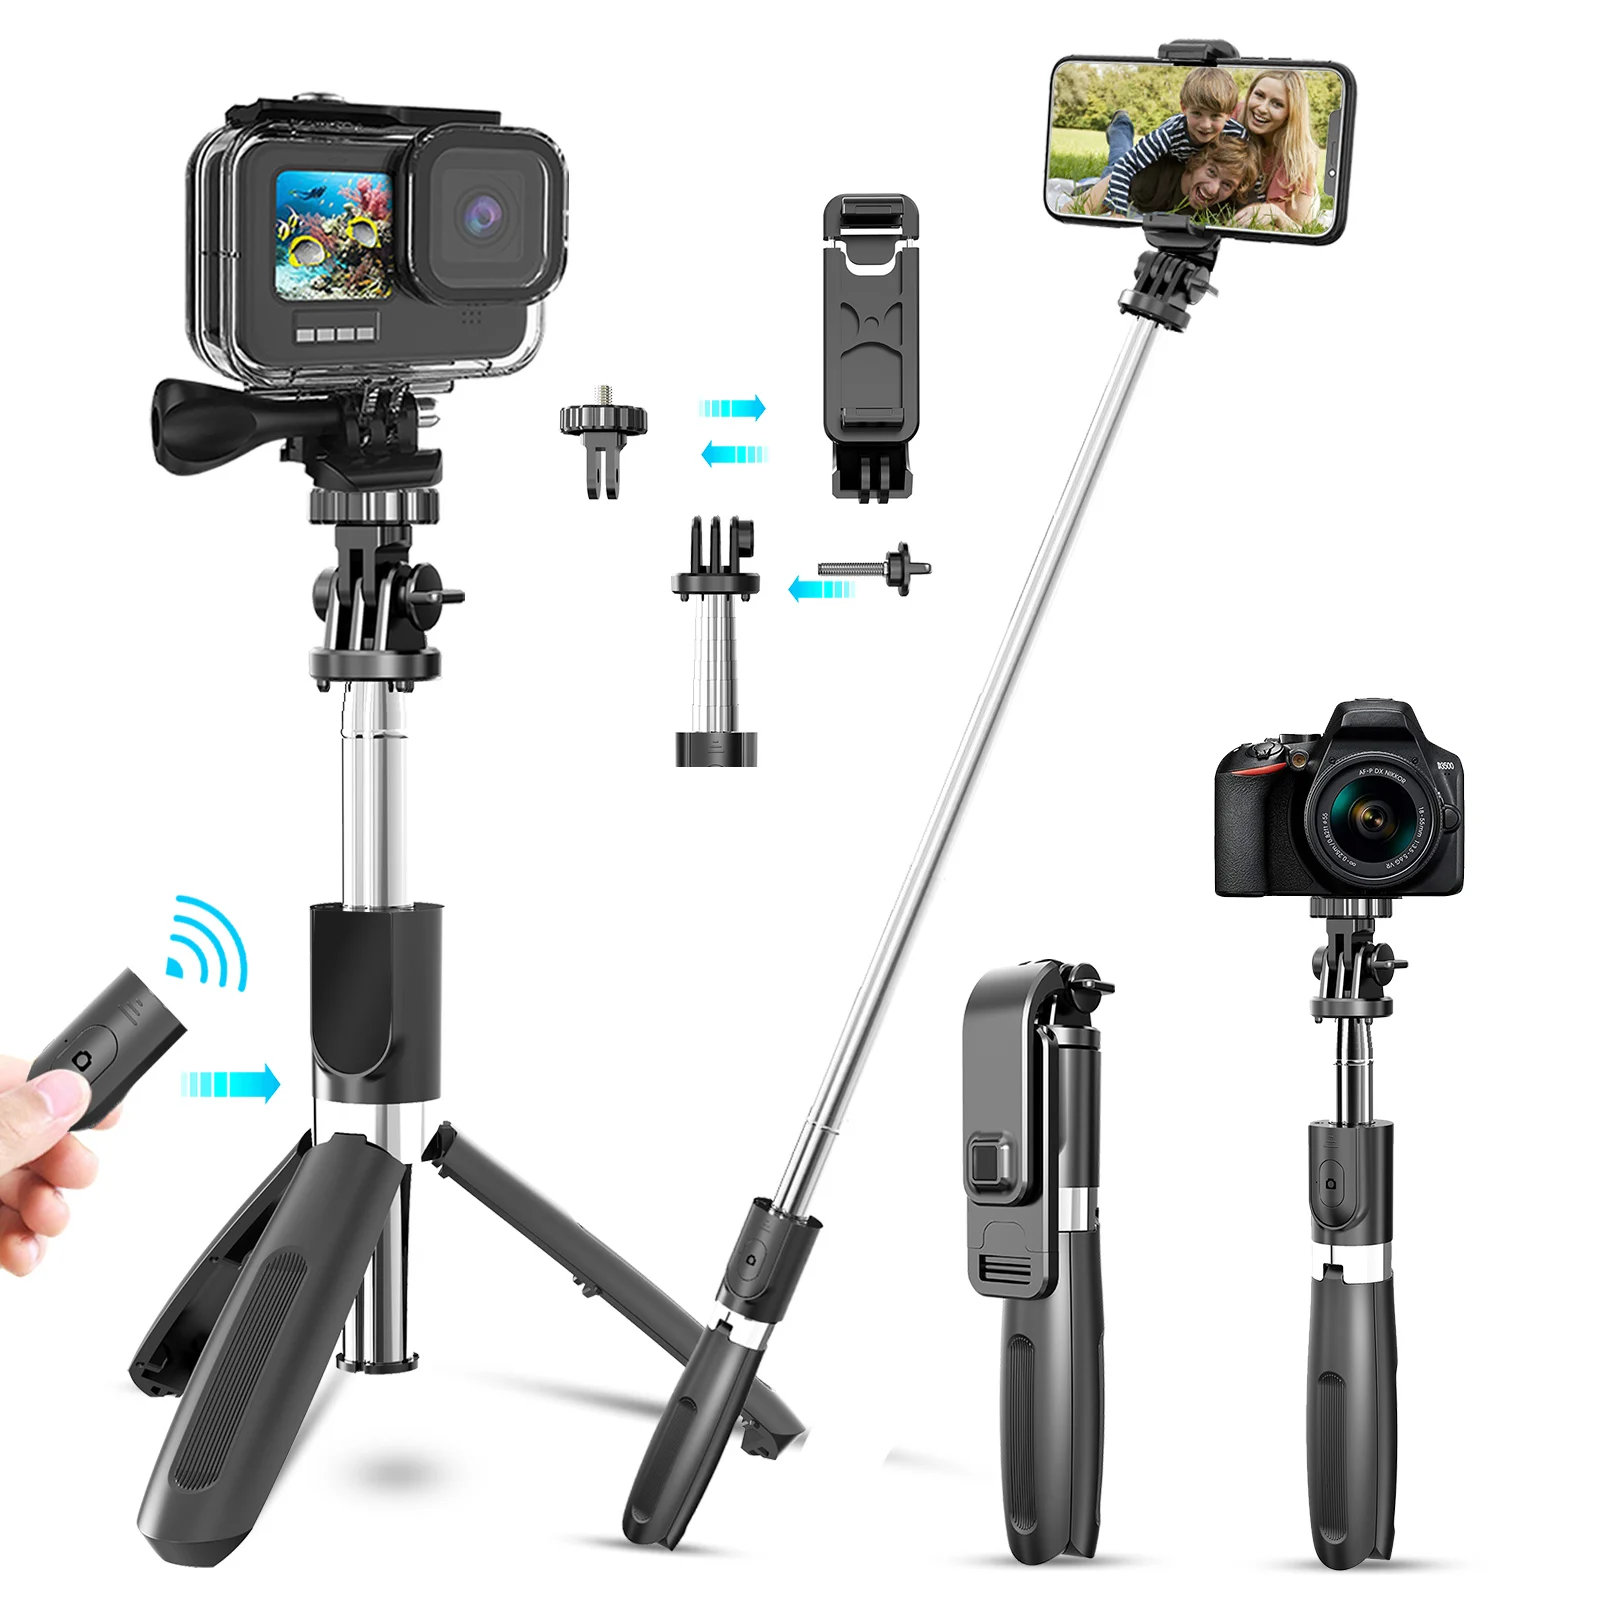 Stable Selfie Stick Tripod Universal for IOS Android Camera 